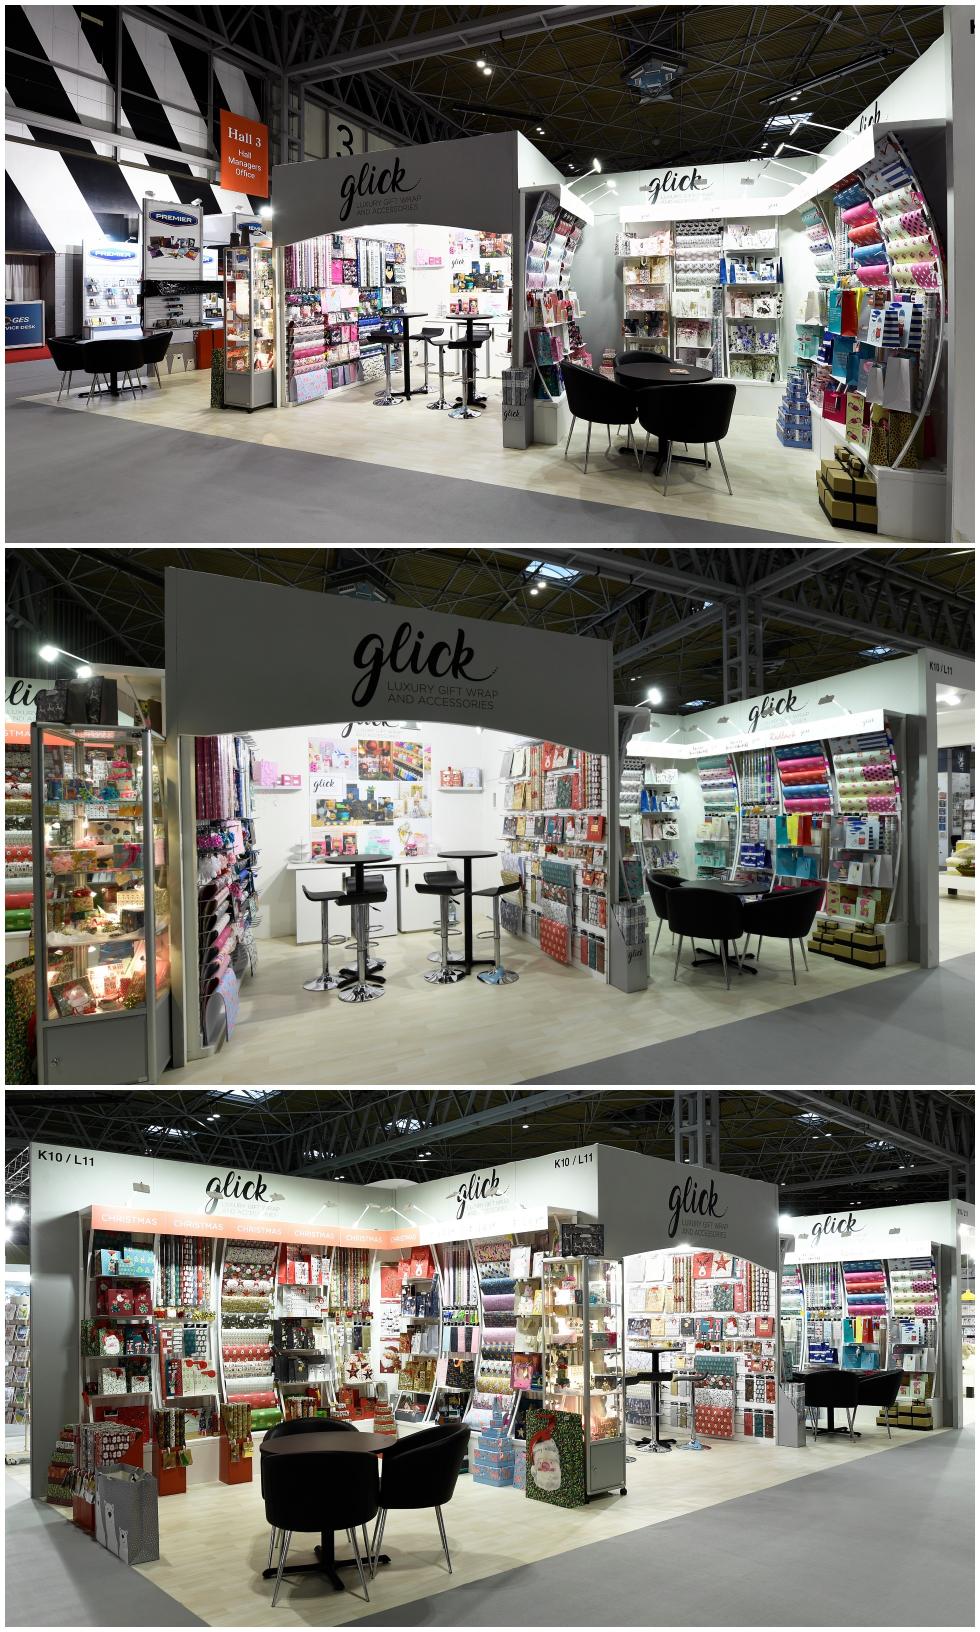 Exhibition stand for Glick at Spring Fair